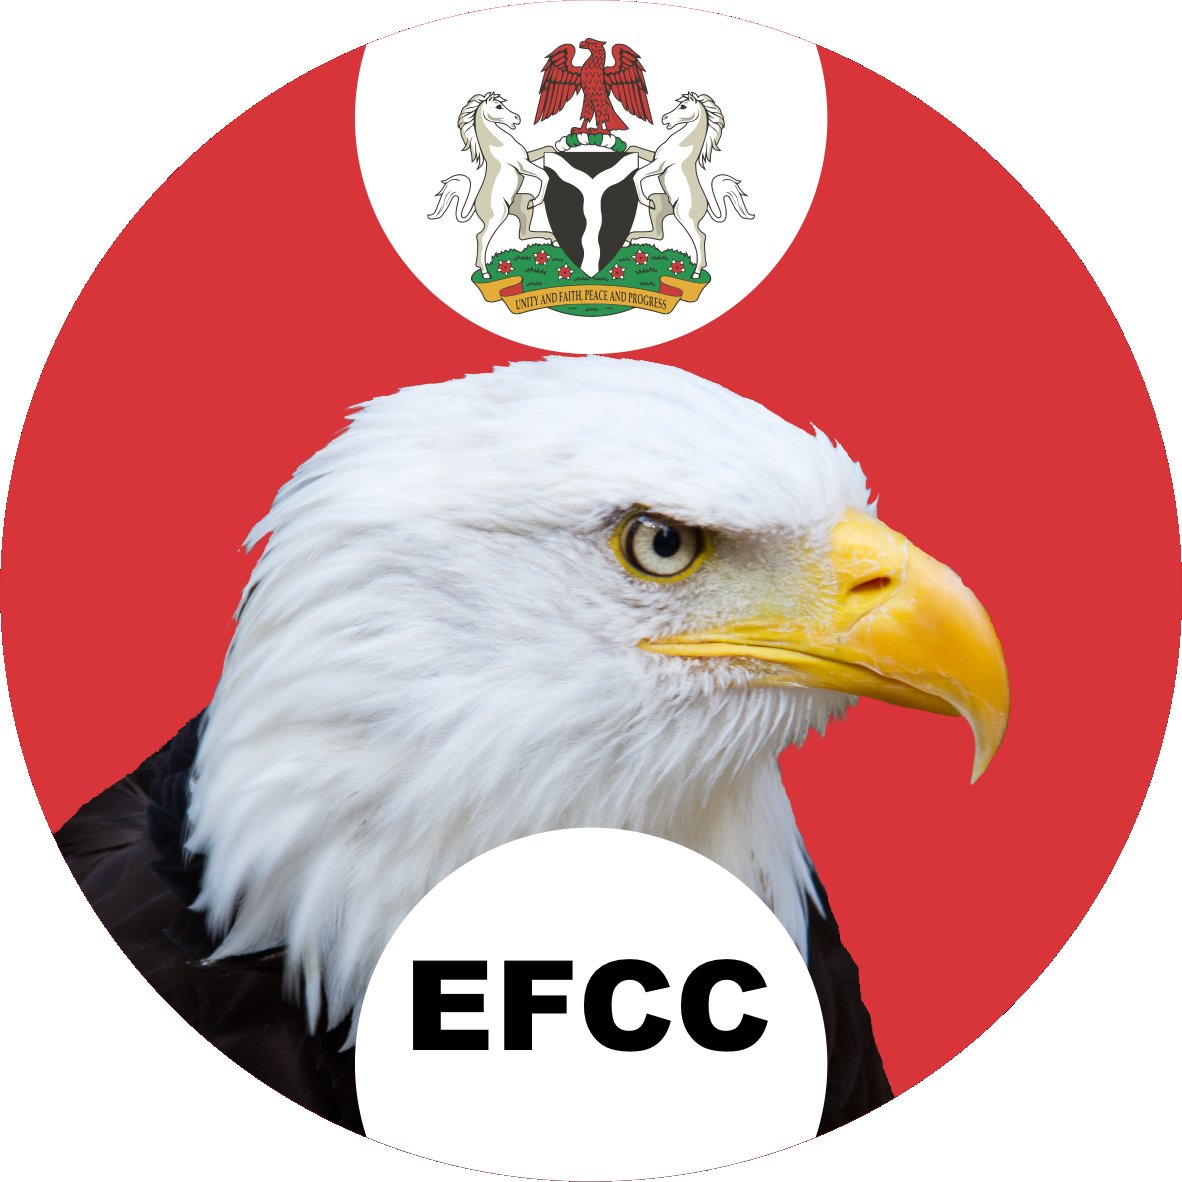 EFCC PRESS STATEMENT Setting the Records Straight on Investigations of Humanitarian Ministry The Economic and Financial Crimes Commission, EFCC, has noticed the rising tide of commentaries, opinions, assumptions and insinuations concerning its progressive investigations into…